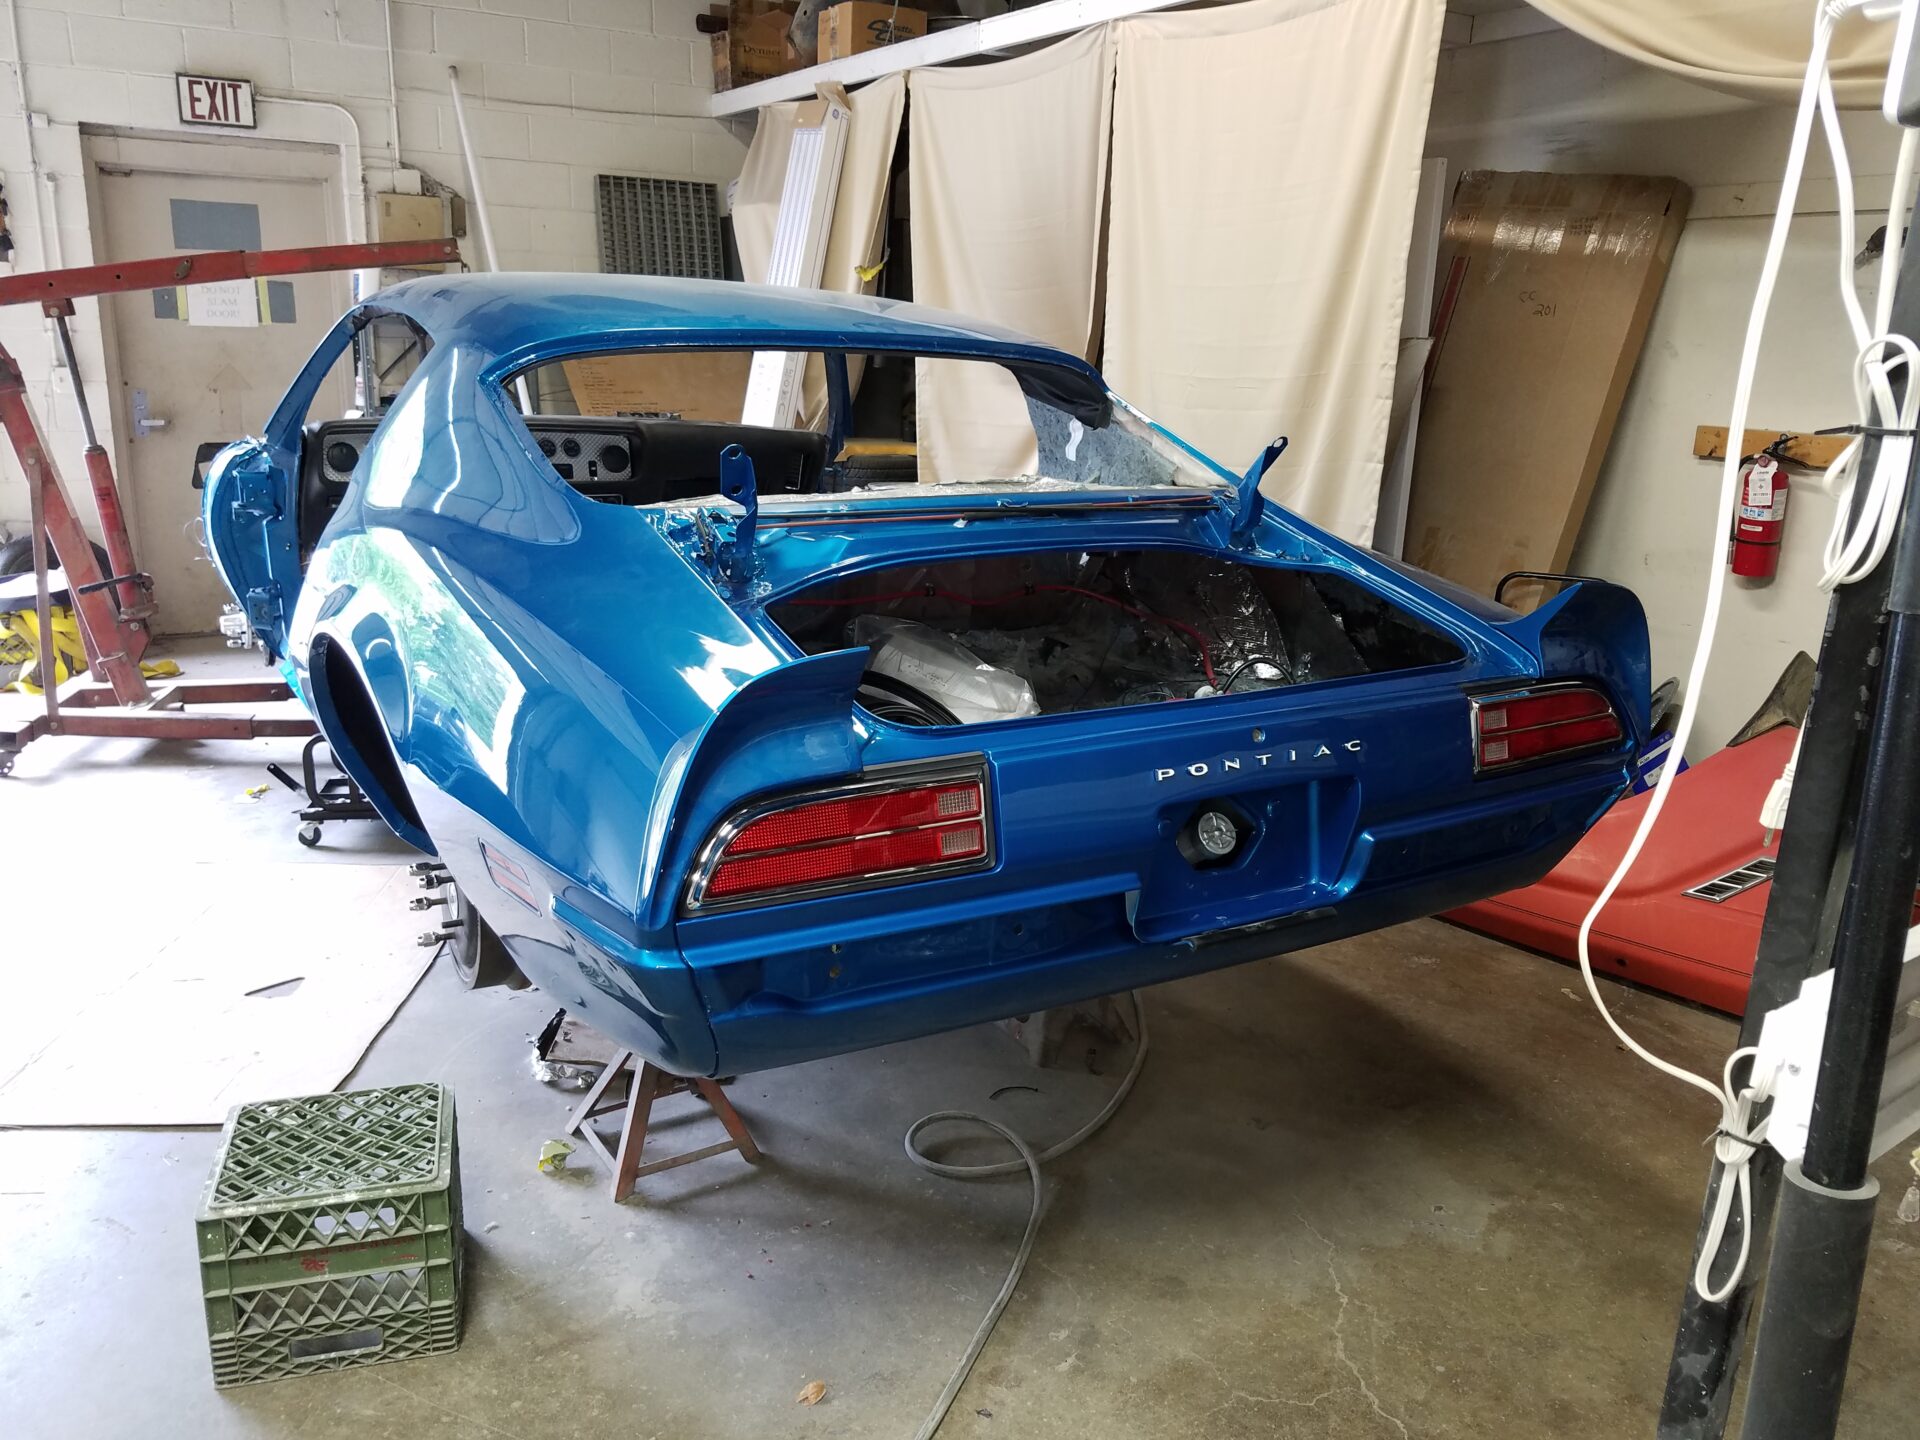 The trunk of the 1971 Pontiac Trans Am being restored